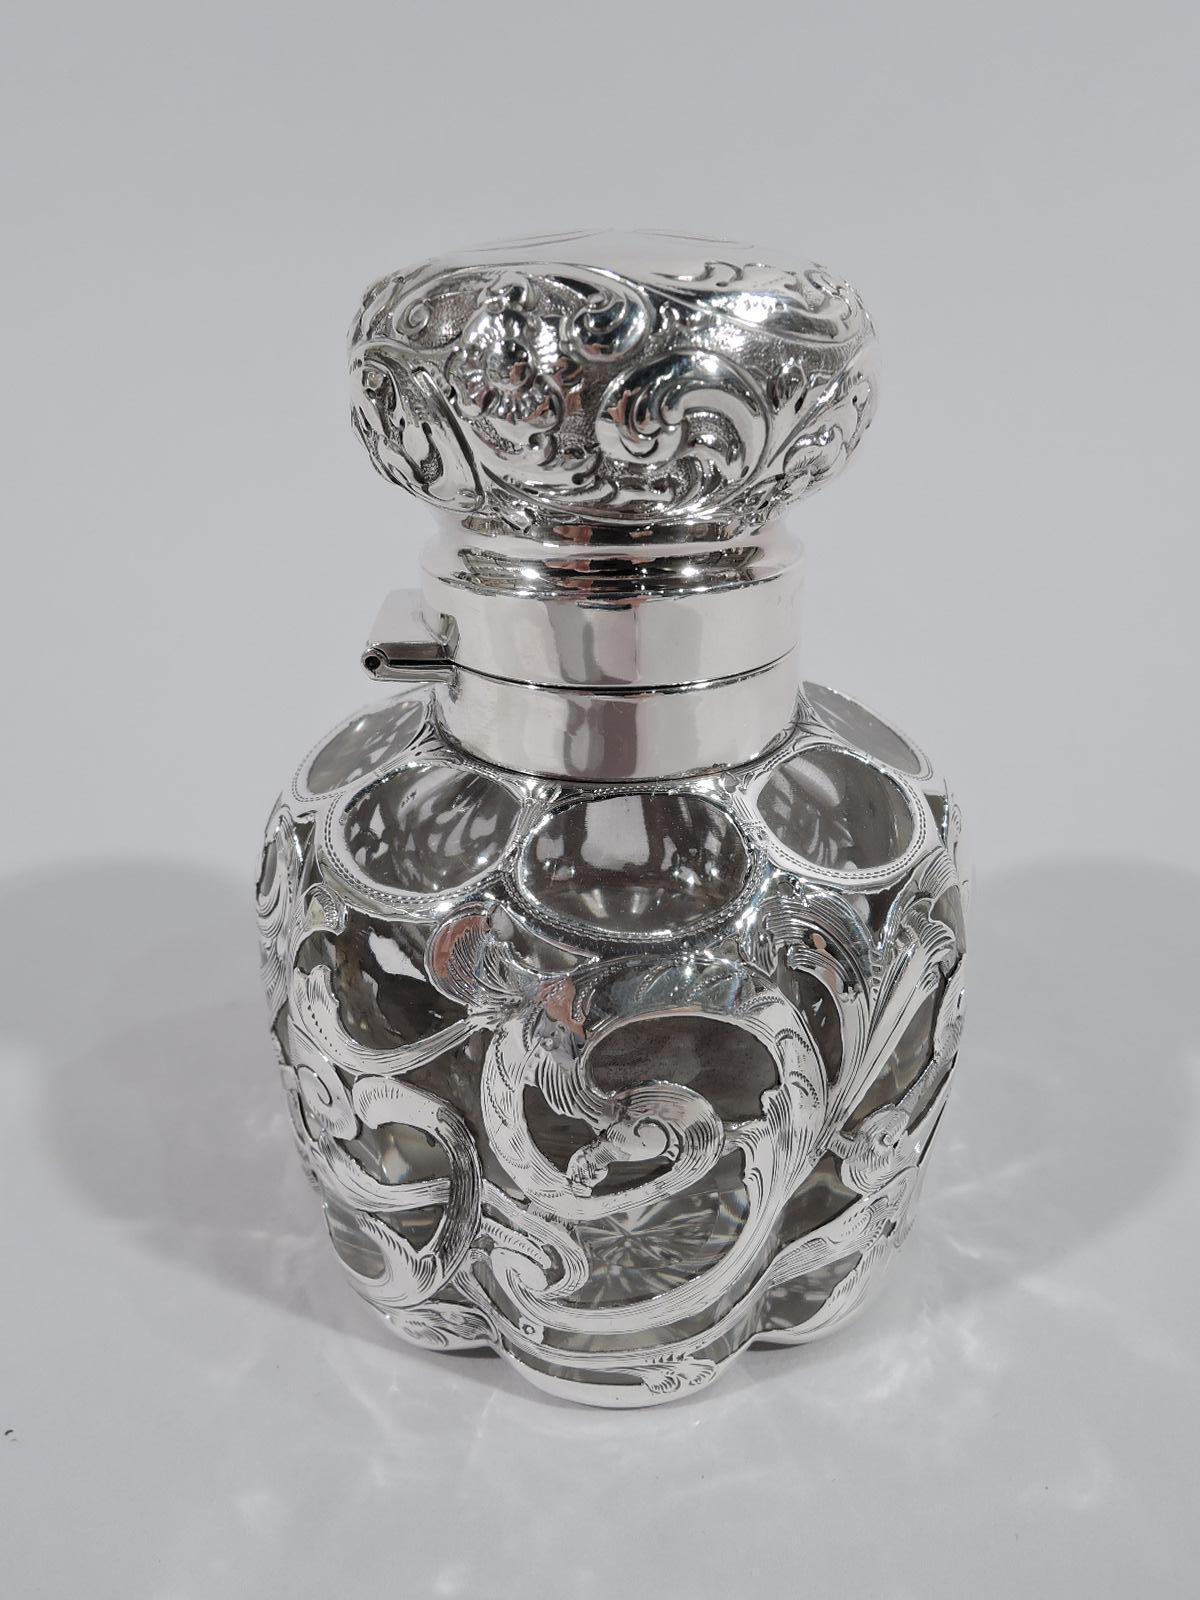 American Art Nouveau clear glass inkwell with silver overlay. Round and lobed with engraved silver overlay in form of whiplash scrolls, leaves, and flowers. Asymmetrical cartouche (vacant). Short neck in silver collar and hinged solid cover with